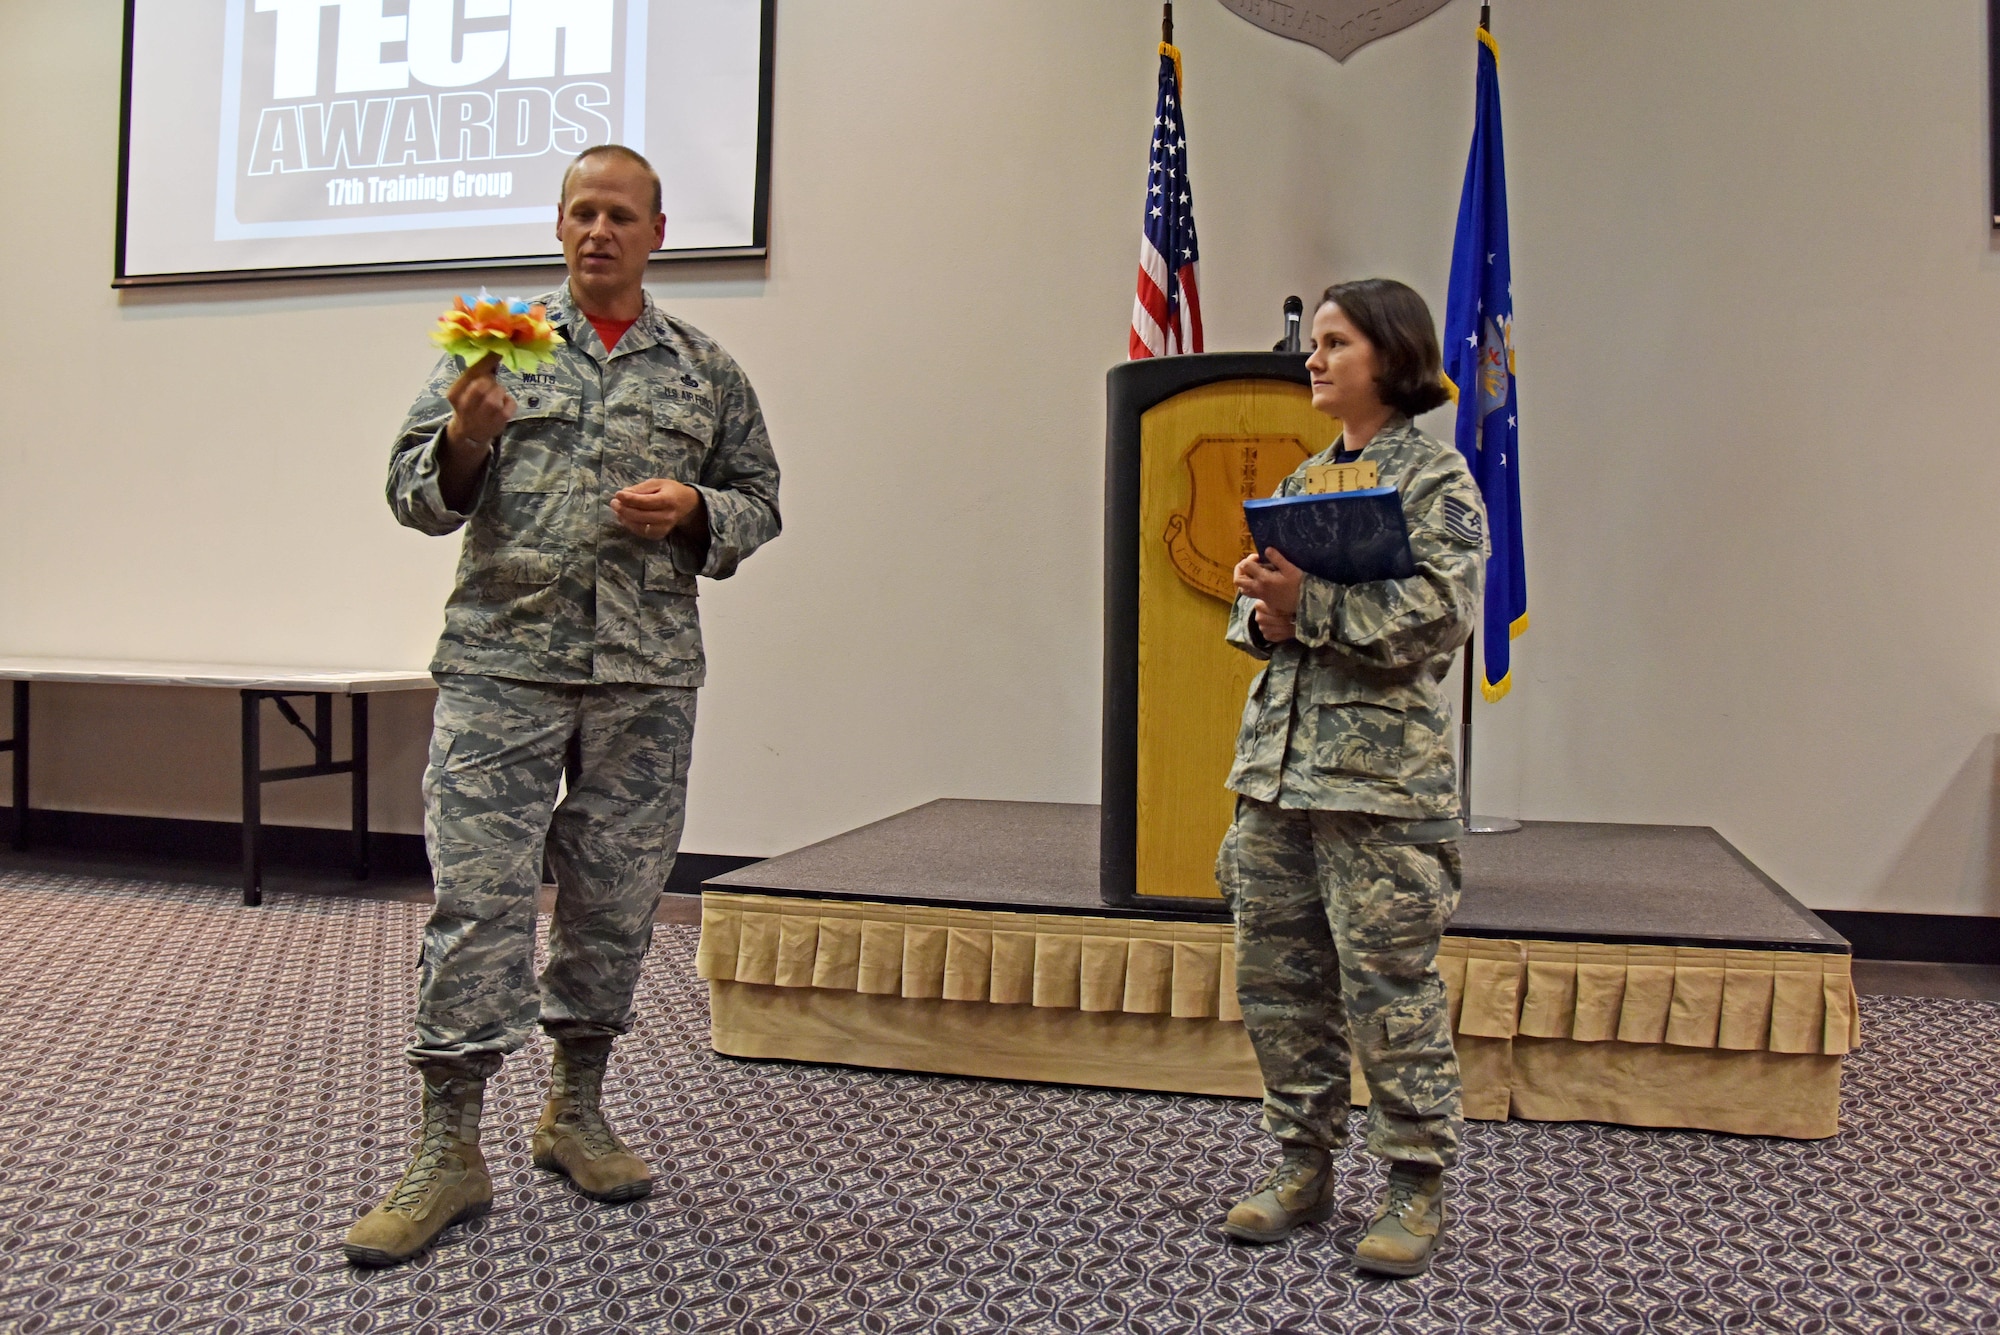 U.S. Air Force Lt. Col. Steven Watts II, 17th Training Group Deputy Commander, asks Tech. Sgt. Cheyanne Samples, 315th Training Squadron instructor, about the paper flower she used in the Top Tech competition at the Event Center on Goodfellow Air Force Base, Texas, May 5, 2017. Watts announced Samples as the best instructor of the 17th TRG for the first quarter. During the competition, instructors had to teach a subject and audience members had to demonstrate their understanding of the topic. (U.S. Air Force photo by Staff Sgt. Joshua Edwards/Released)